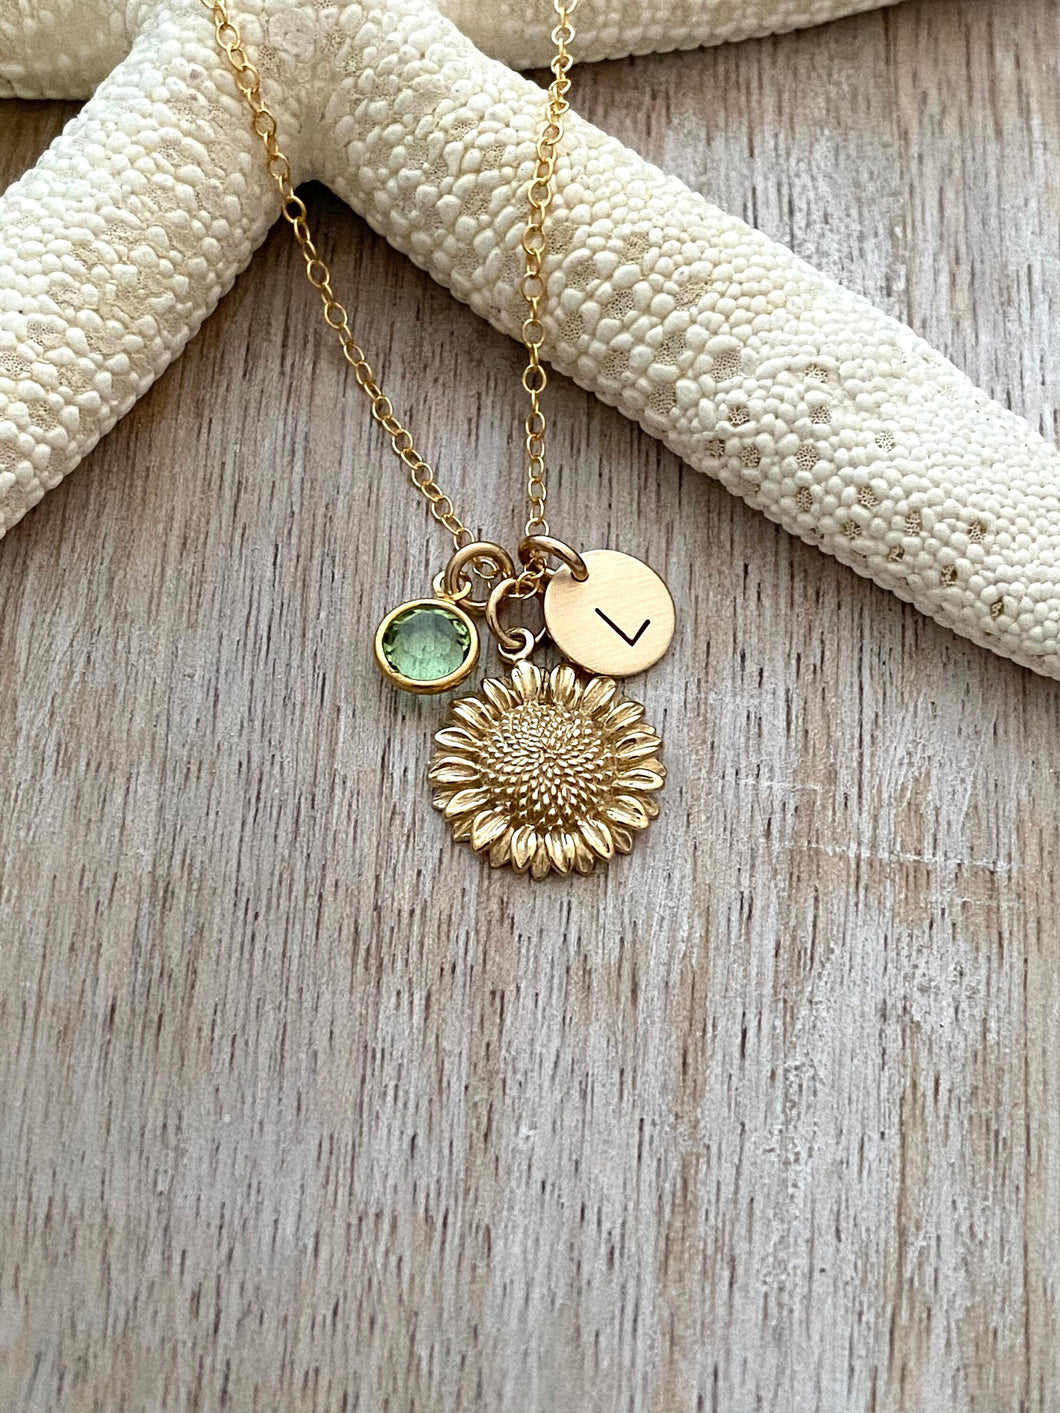 Sterling silver Sunflower charm necklace - Plant Jewelry - Flower necklace, Personalized initial -  Swarovski Birthstone - gift for her